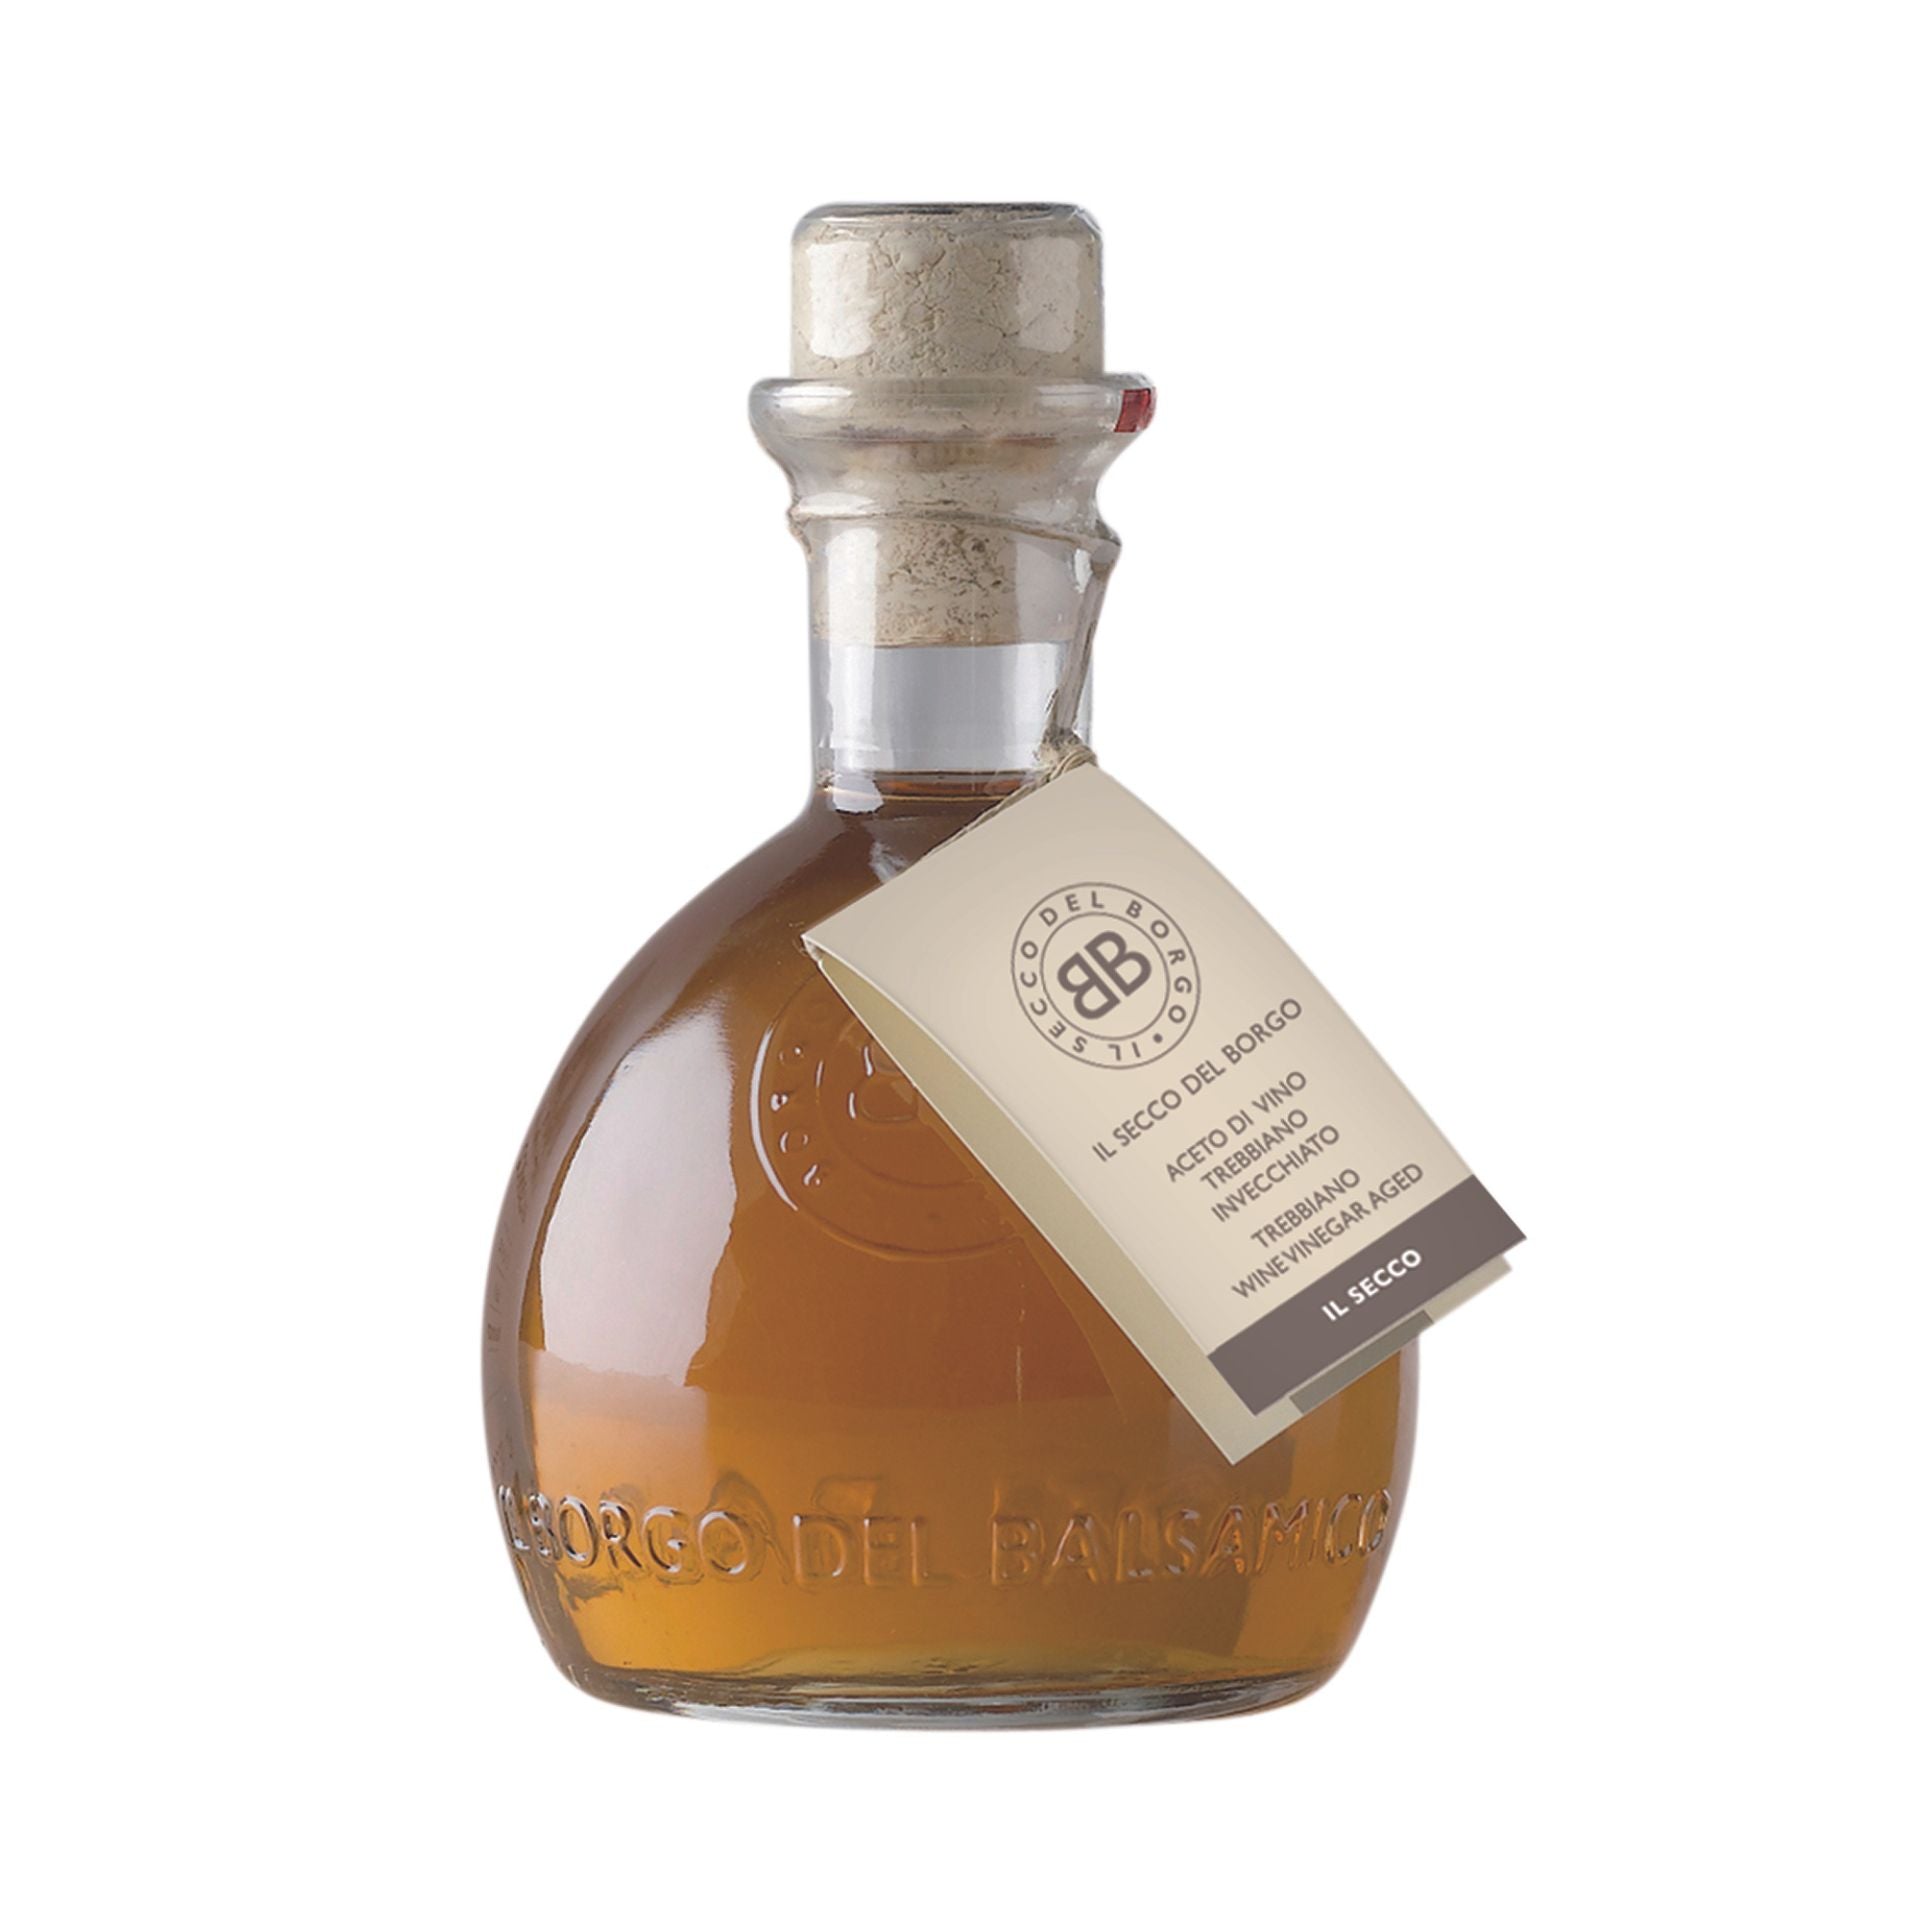 Il Borgo del Balsamico Trebbiano Single Grape Variety Wine Vinegar Aged in Barrique 250ml  | Imported and distributed in the UK by Just Gourmet Foods